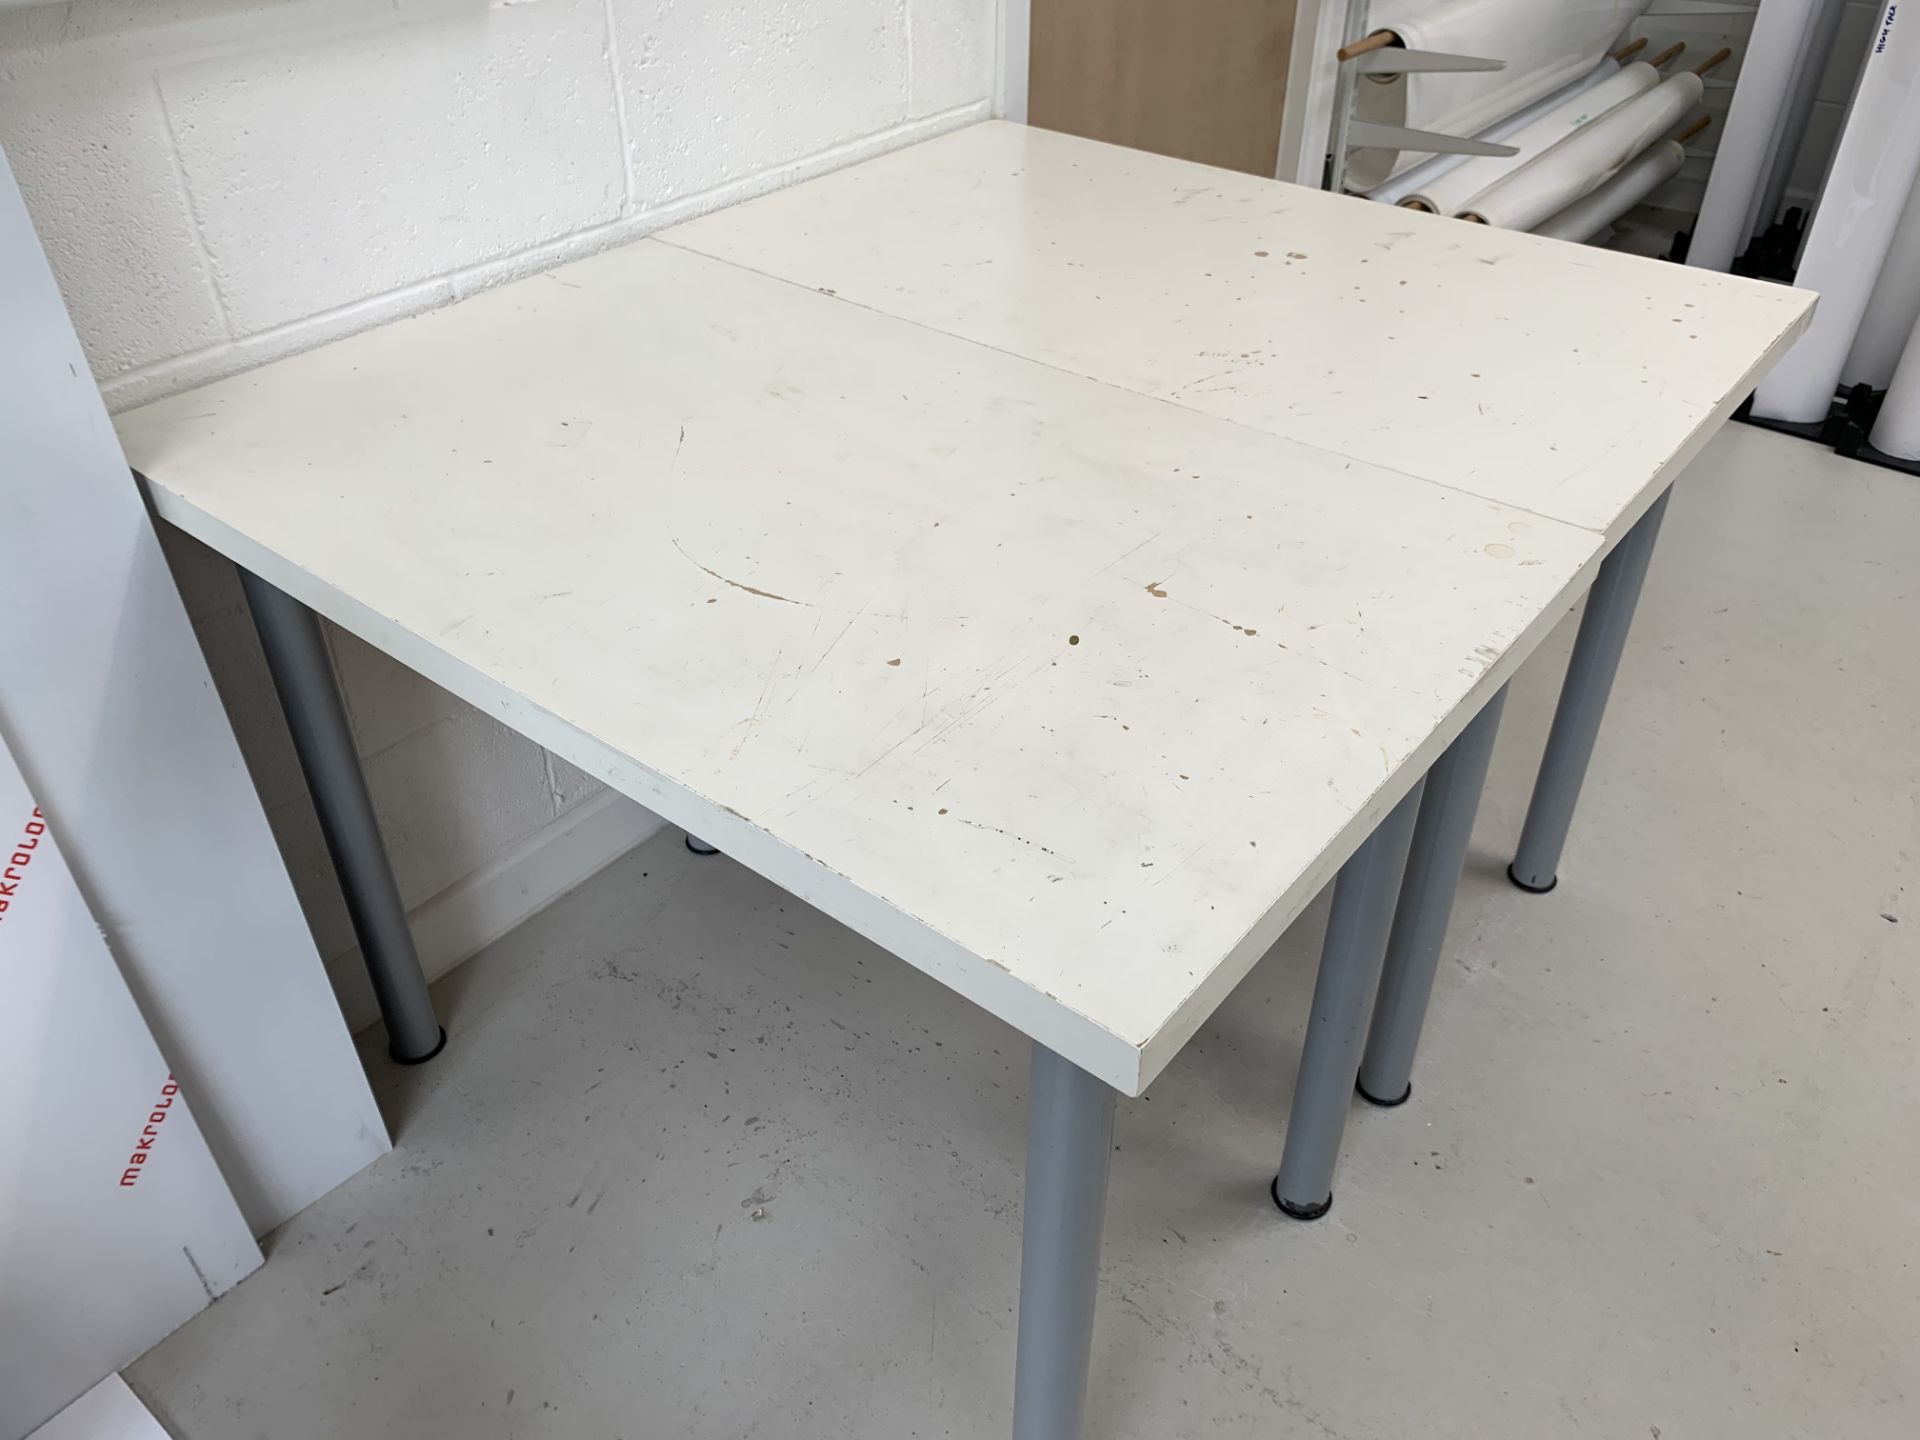 12 x White Tables with Steel Tube Legs (1000mm x 600mm)